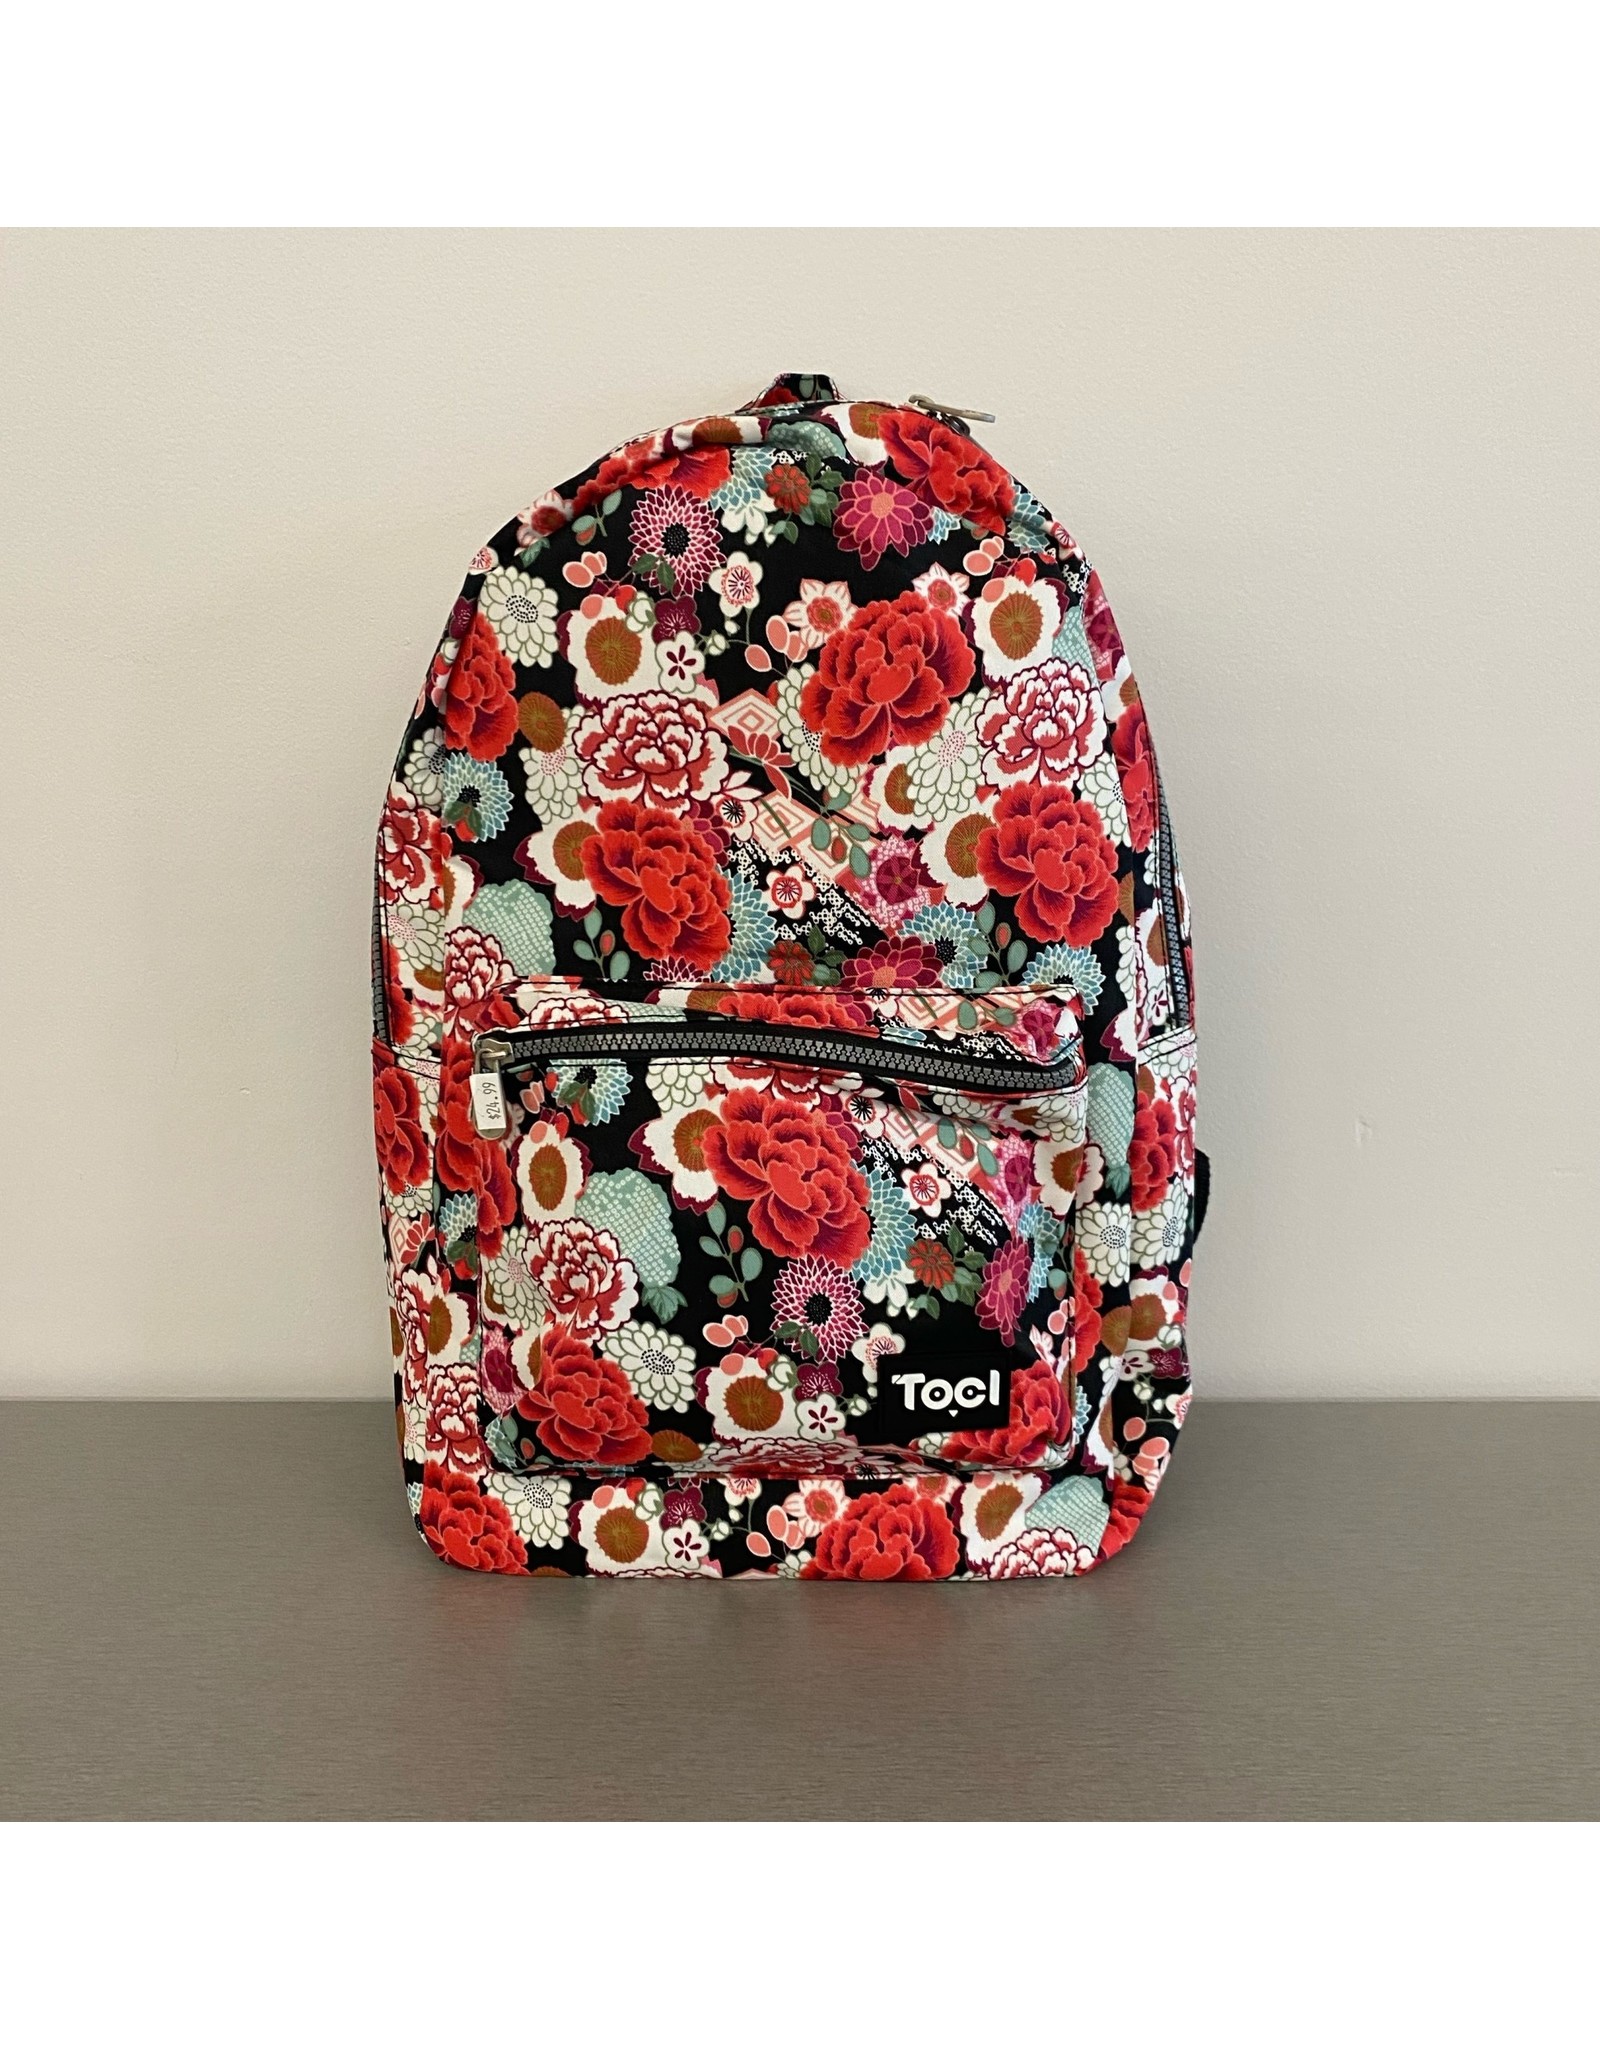 Toci - Red Floral Pattern Backpack